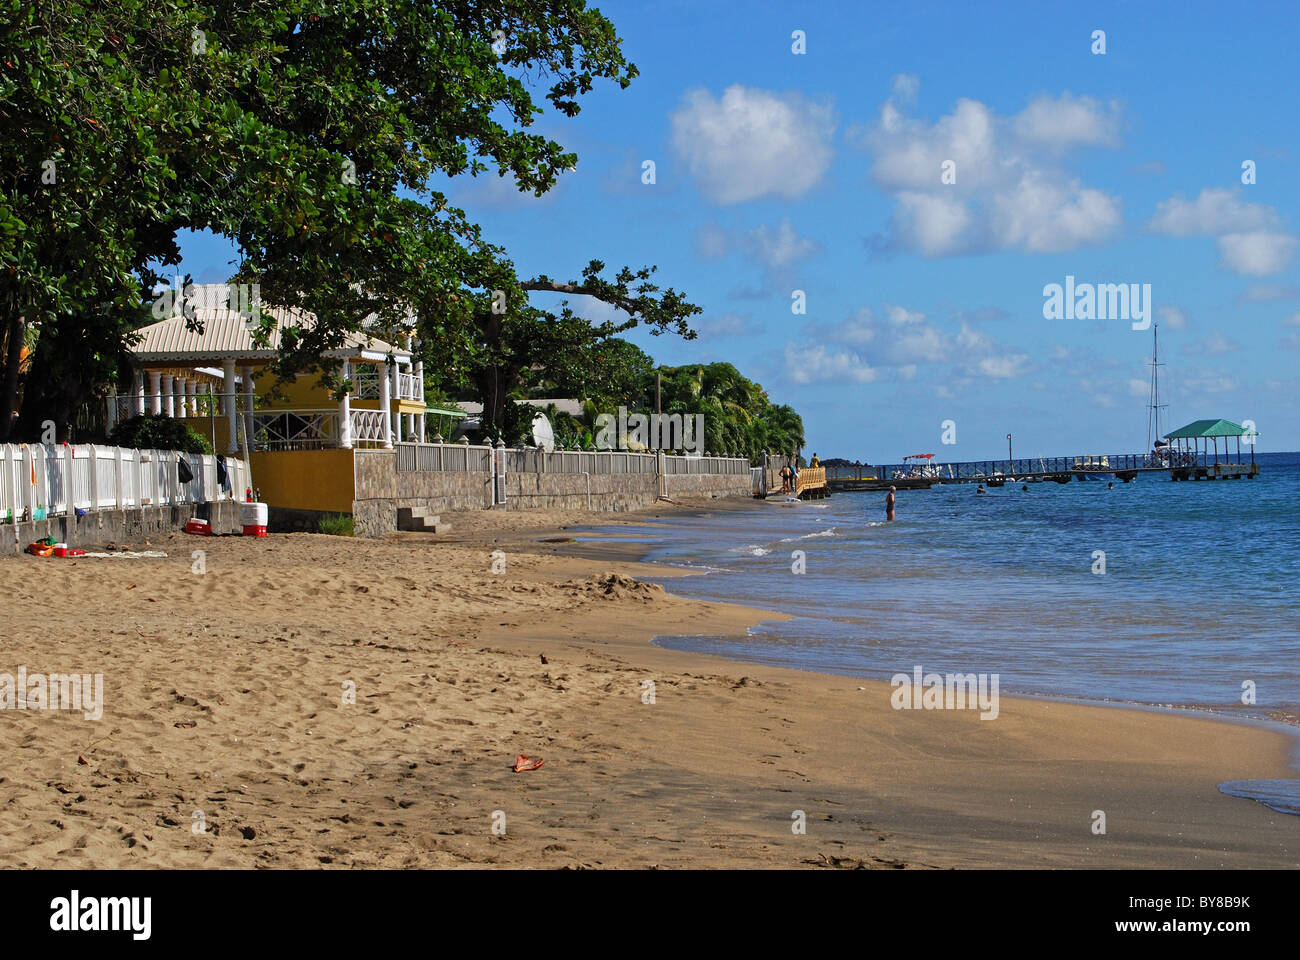 View along the beach, Kingstown, St. Vincent and the Grenadines, Caribbean. Stock Photo